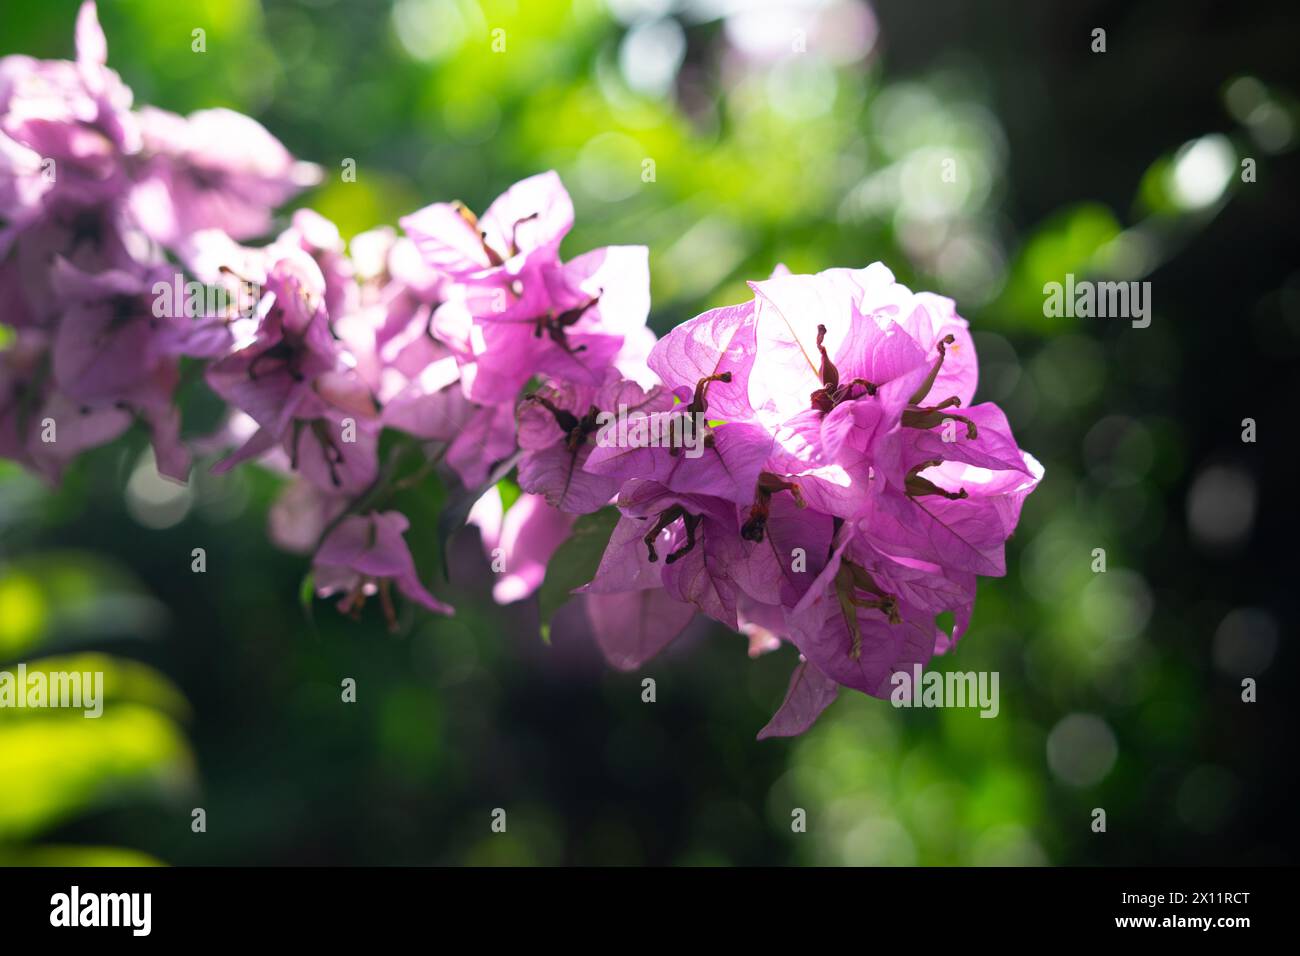 A bouquet of sweet pink Bougainvillea flower blossom with green leaves on white isolated background Stock Photo